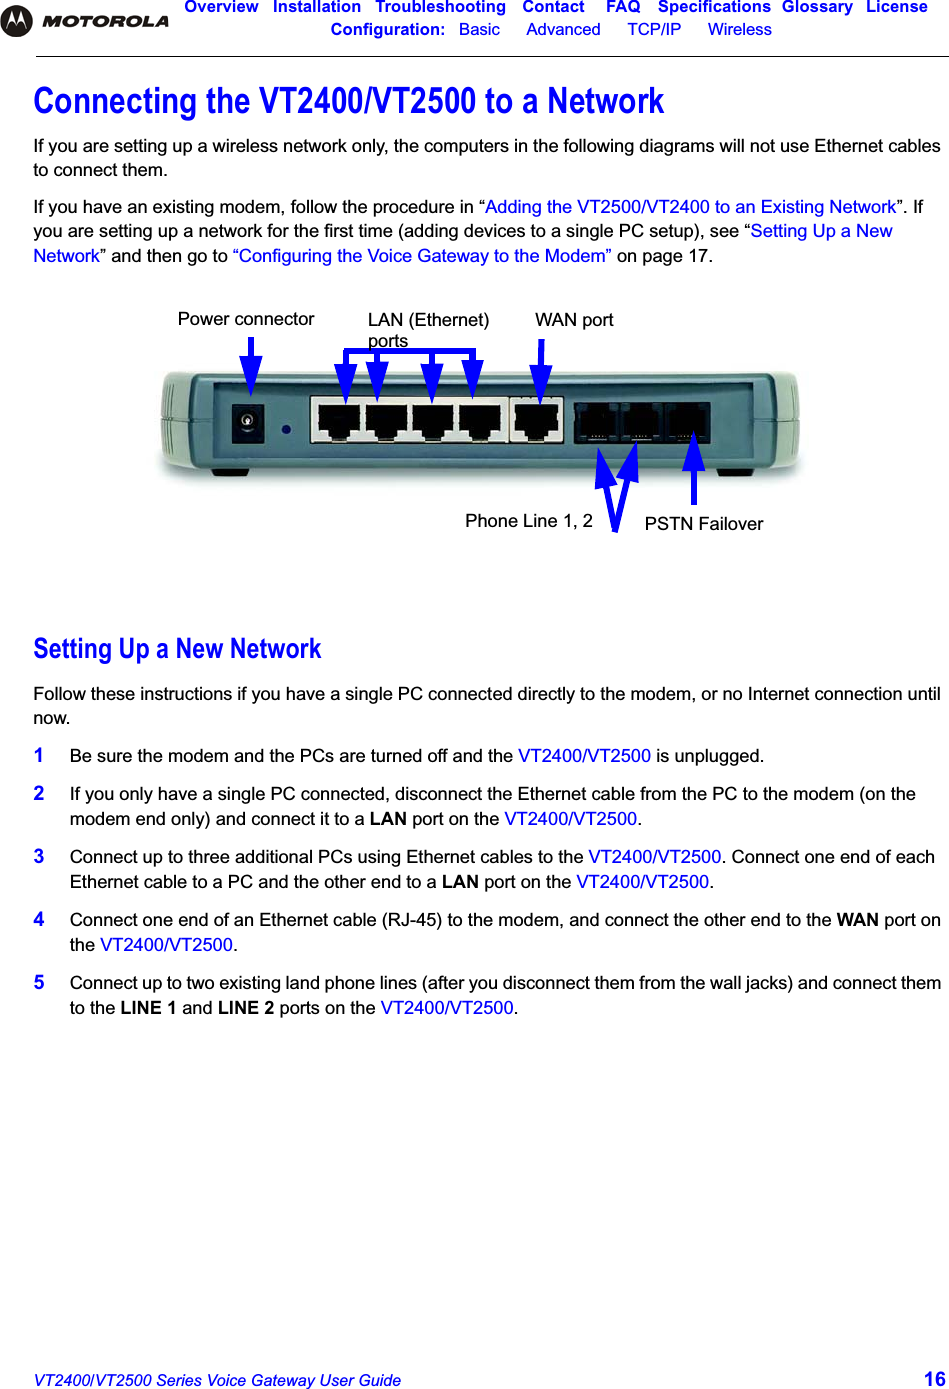 Overview Installation Troubleshooting Contact FAQ Specifications Glossary LicenseConfiguration:   Basic      Advanced      TCP/IP      Wireless VT2400/VT2500 Series Voice Gateway User Guide 16Connecting the VT2400/VT2500 to a NetworkIf you are setting up a wireless network only, the computers in the following diagrams will not use Ethernet cables to connect them.If you have an existing modem, follow the procedure in “Adding the VT2500/VT2400 to an Existing Network”. If you are setting up a network for the first time (adding devices to a single PC setup), see “Setting Up a New Network” and then go to “Configuring the Voice Gateway to the Modem” on page 17.Setting Up a New NetworkFollow these instructions if you have a single PC connected directly to the modem, or no Internet connection until now.1Be sure the modem and the PCs are turned off and the VT2400/VT2500 is unplugged. 2If you only have a single PC connected, disconnect the Ethernet cable from the PC to the modem (on the modem end only) and connect it to a LAN port on the VT2400/VT2500.3Connect up to three additional PCs using Ethernet cables to the VT2400/VT2500. Connect one end of each Ethernet cable to a PC and the other end to a LAN port on the VT2400/VT2500.4Connect one end of an Ethernet cable (RJ-45) to the modem, and connect the other end to the WAN port on the VT2400/VT2500.5Connect up to two existing land phone lines (after you disconnect them from the wall jacks) and connect them to the LINE 1 and LINE 2 ports on the VT2400/VT2500.Power connector LAN (Ethernet)  WAN portPhone Line 1, 2 PSTN Failoverports